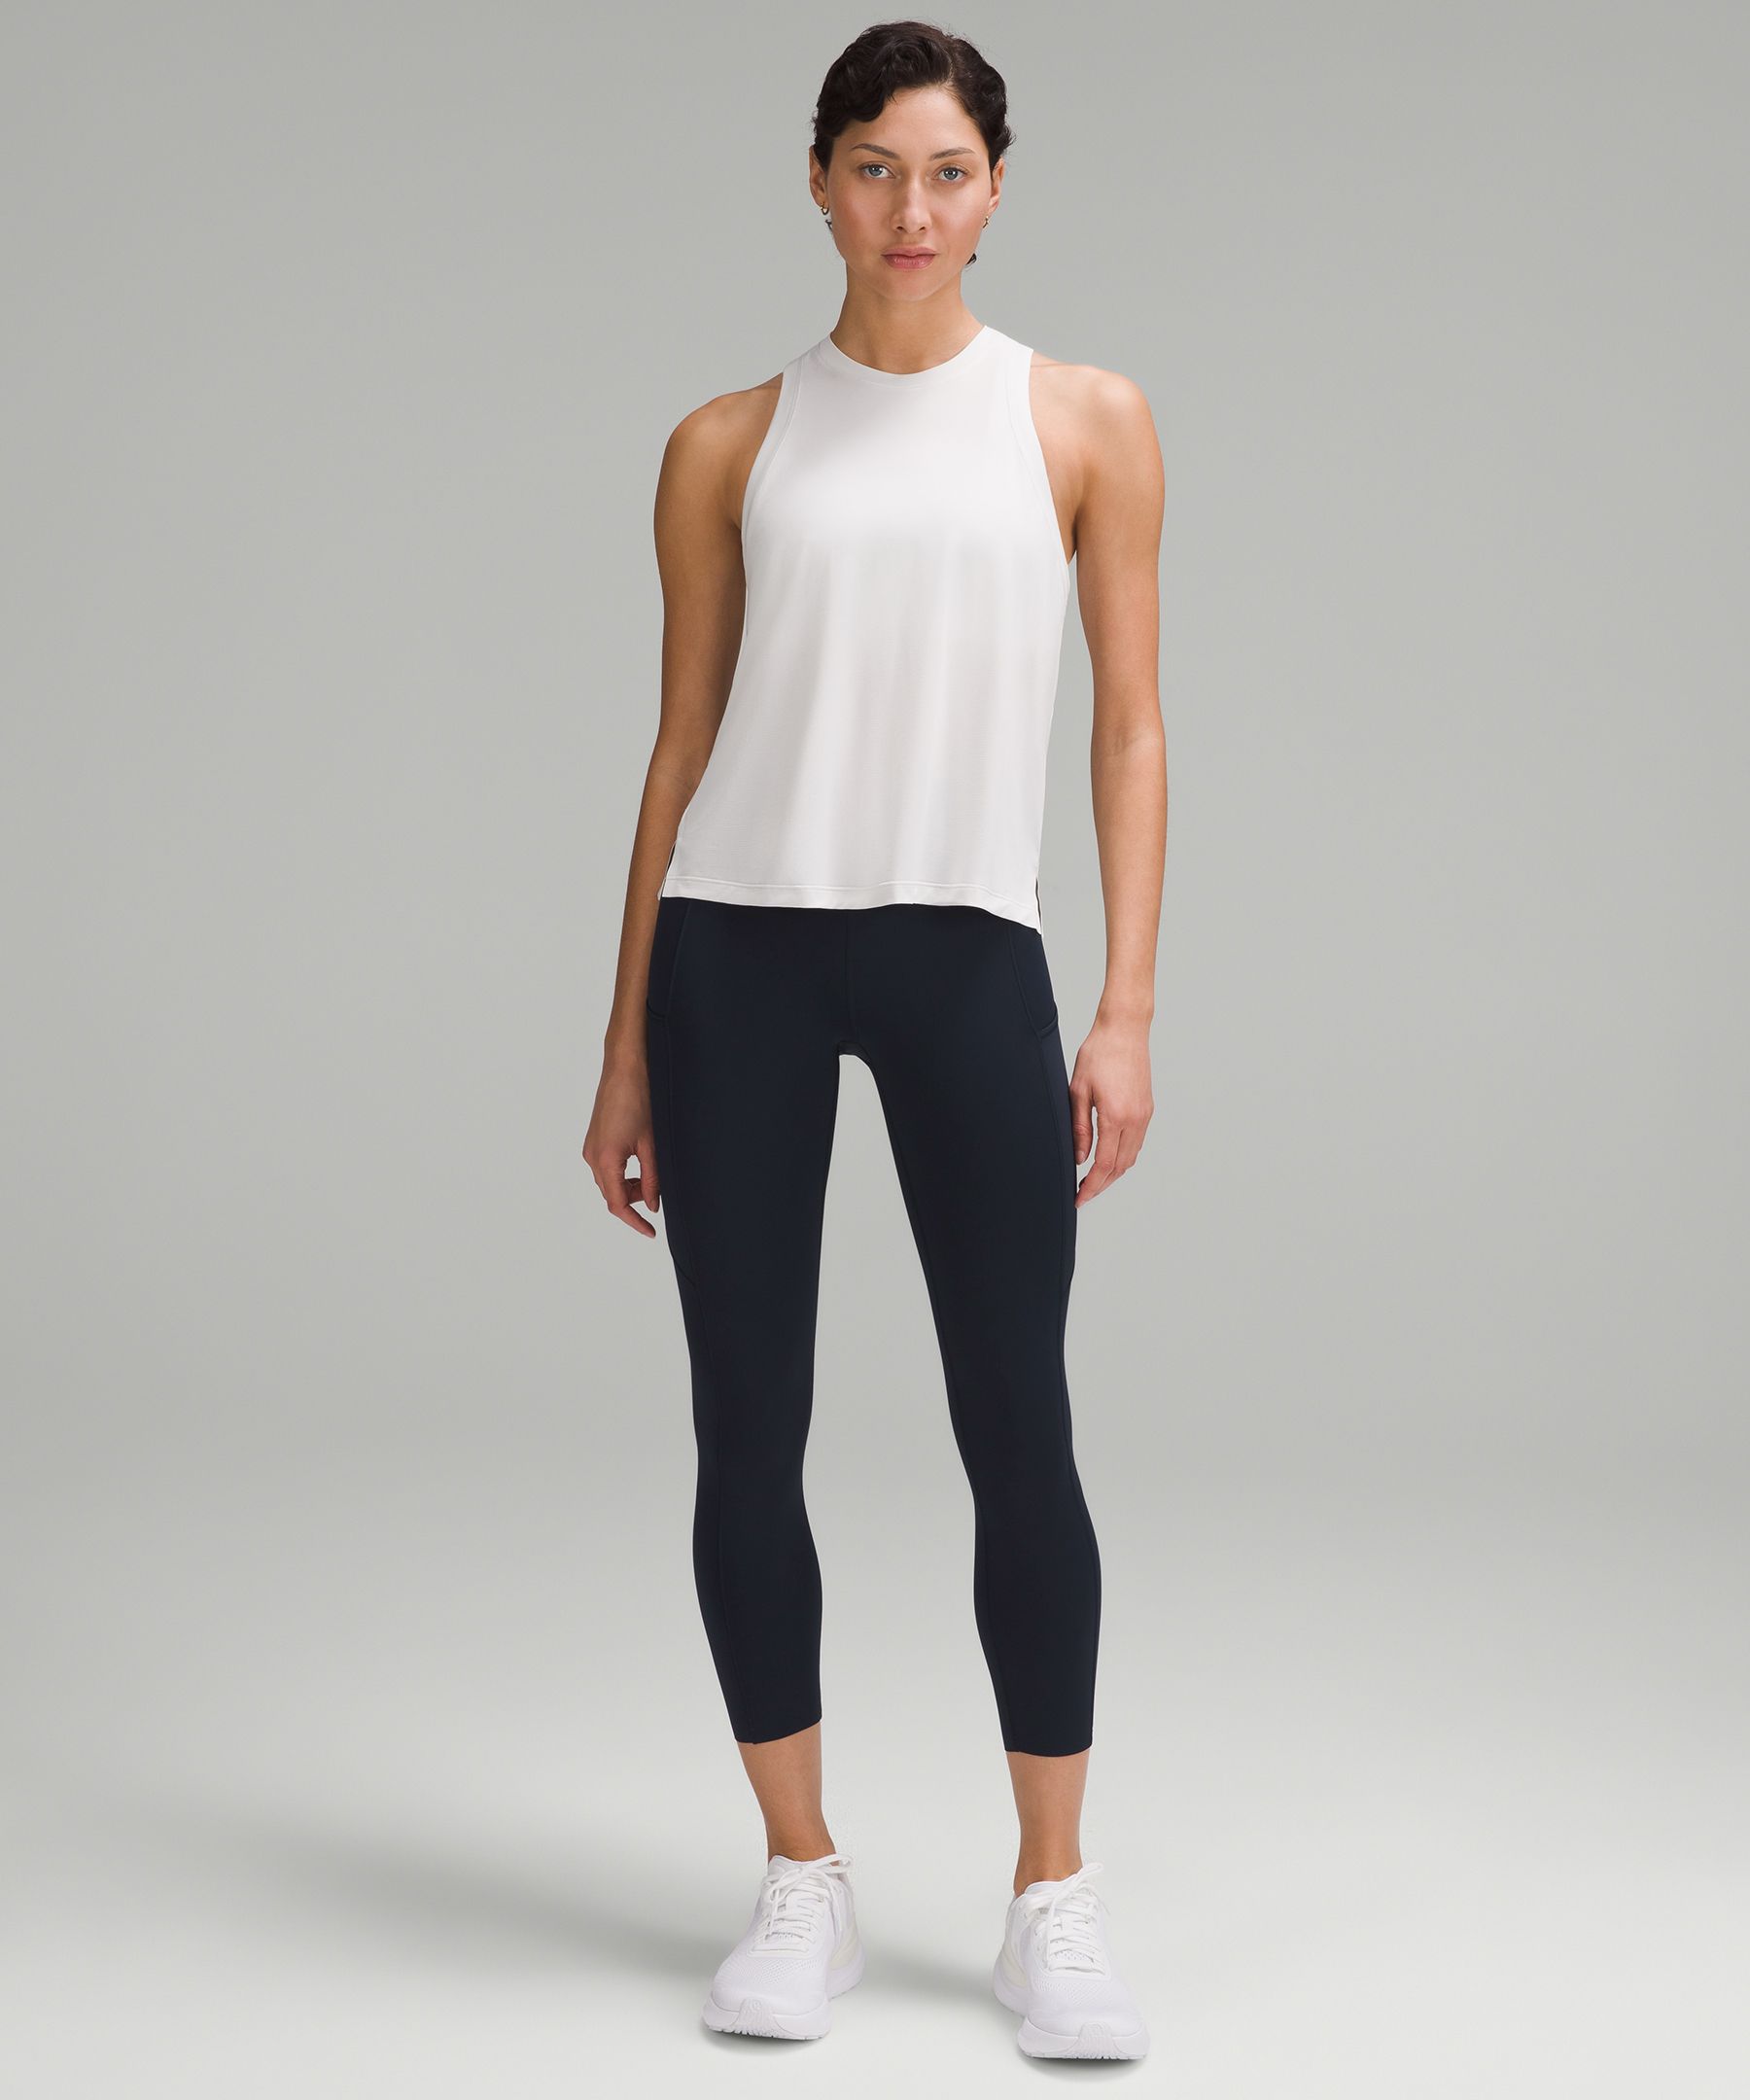 Lululemon Fast and Free 23 inch Green Size 4 - $40 (68% Off Retail) - From  Alyssa